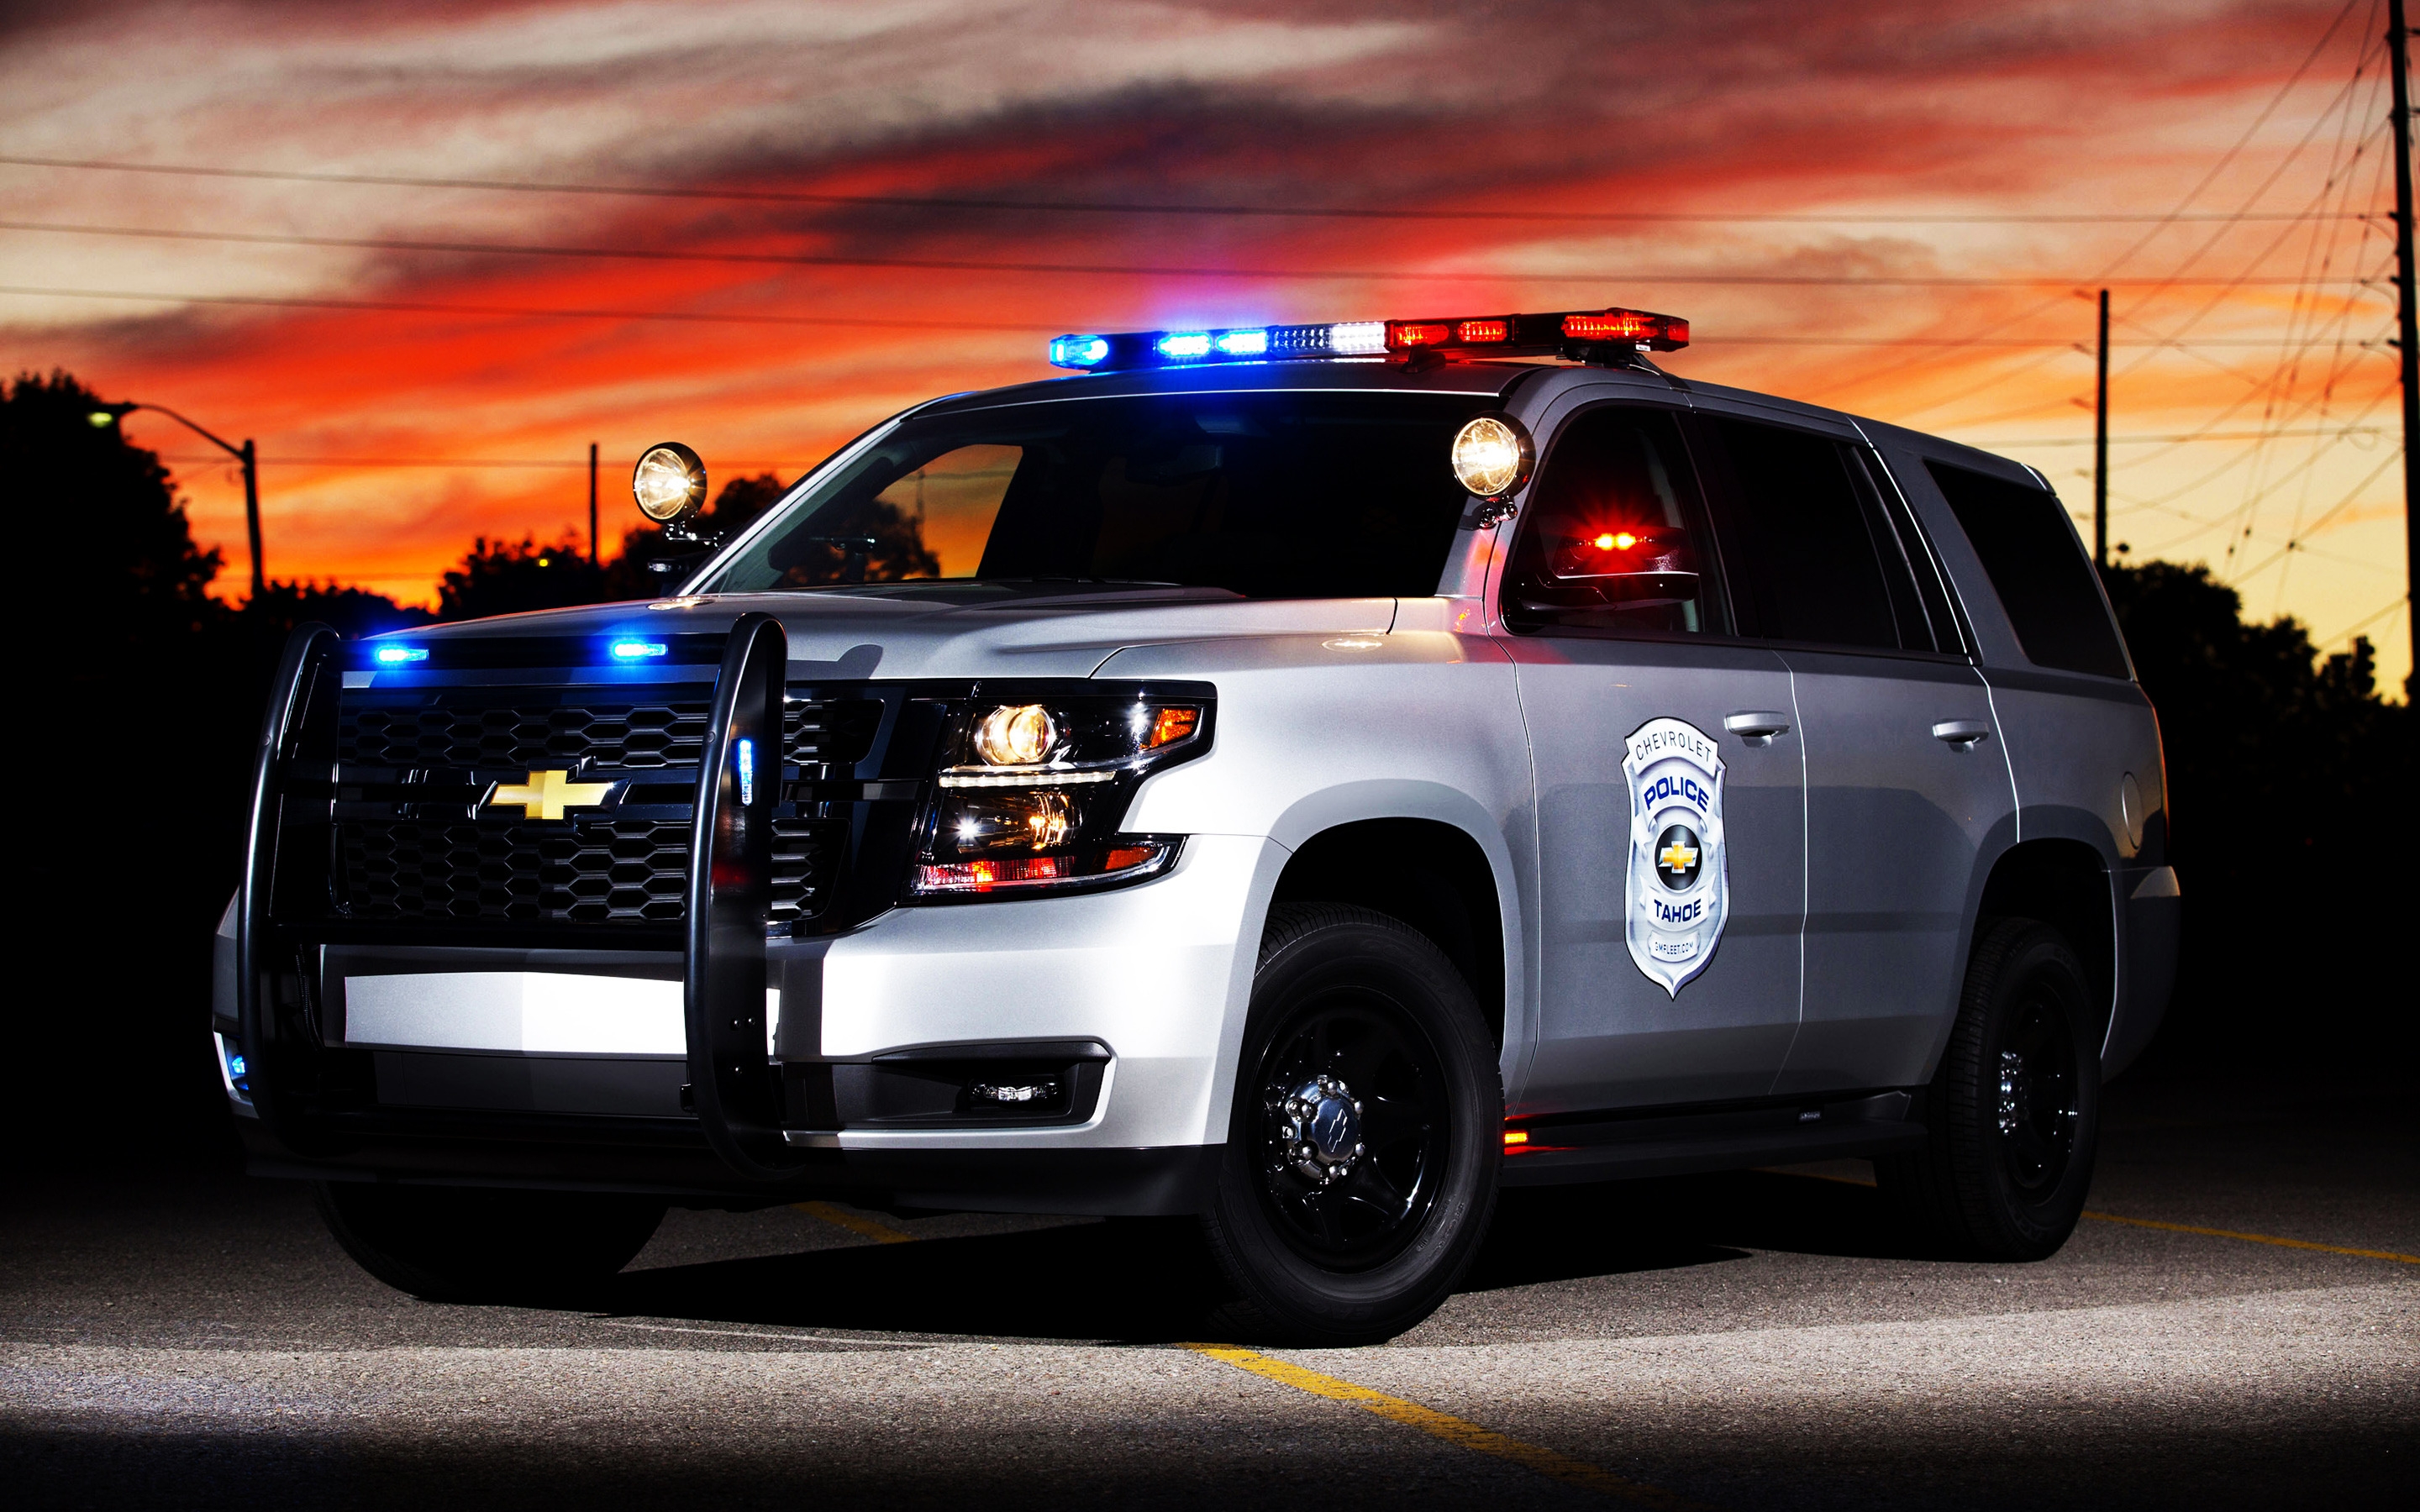 2015 Chevrolet Tahoe Police Concept for 2880 x 1800 Retina Display resolution